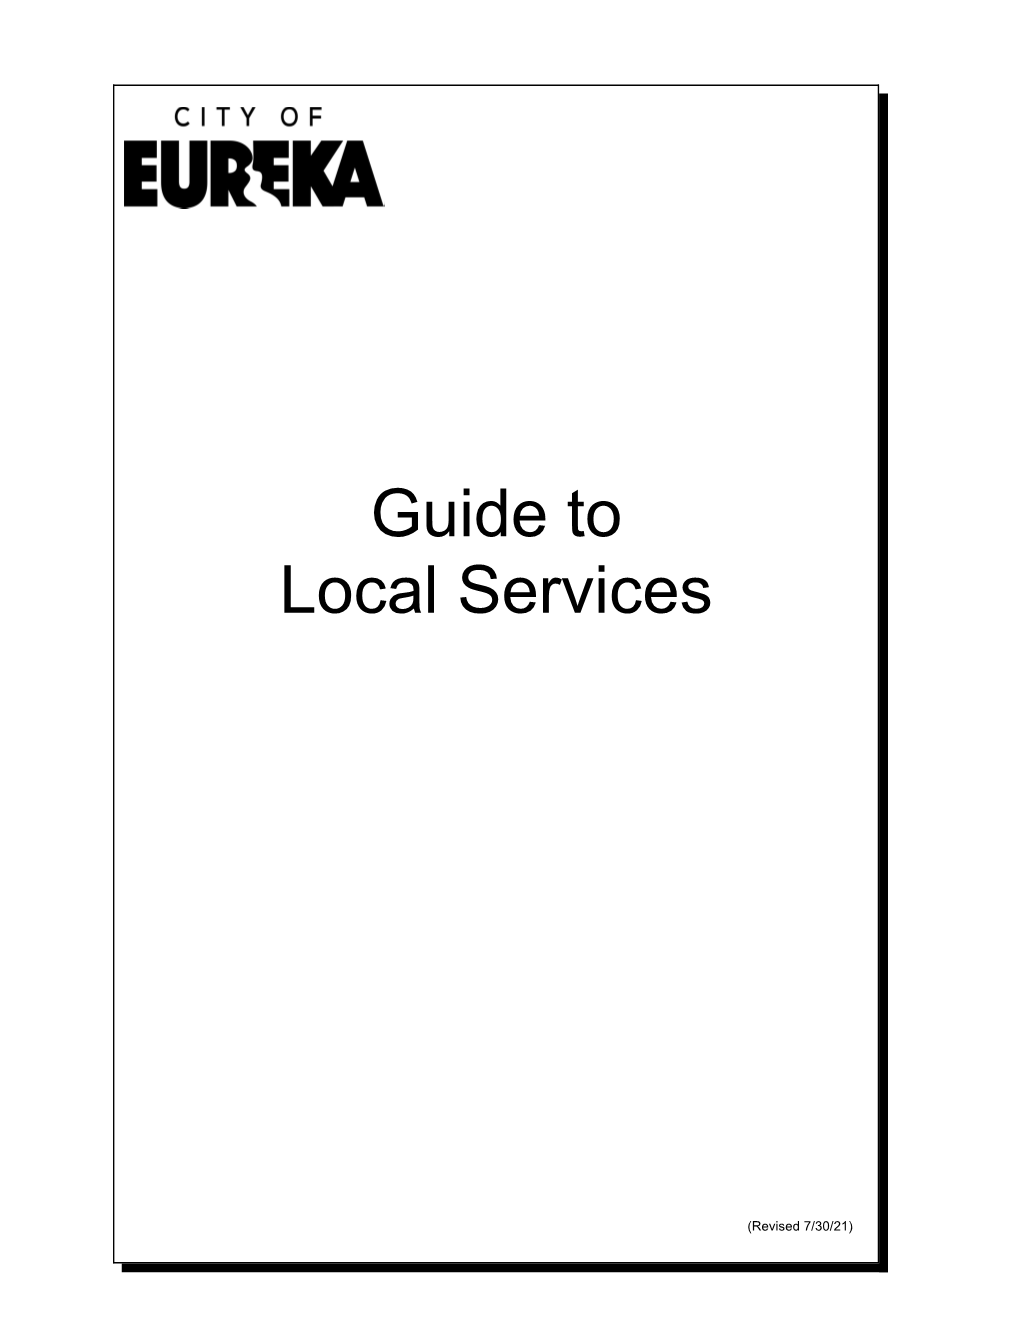 Guide to Local Services (PDF)